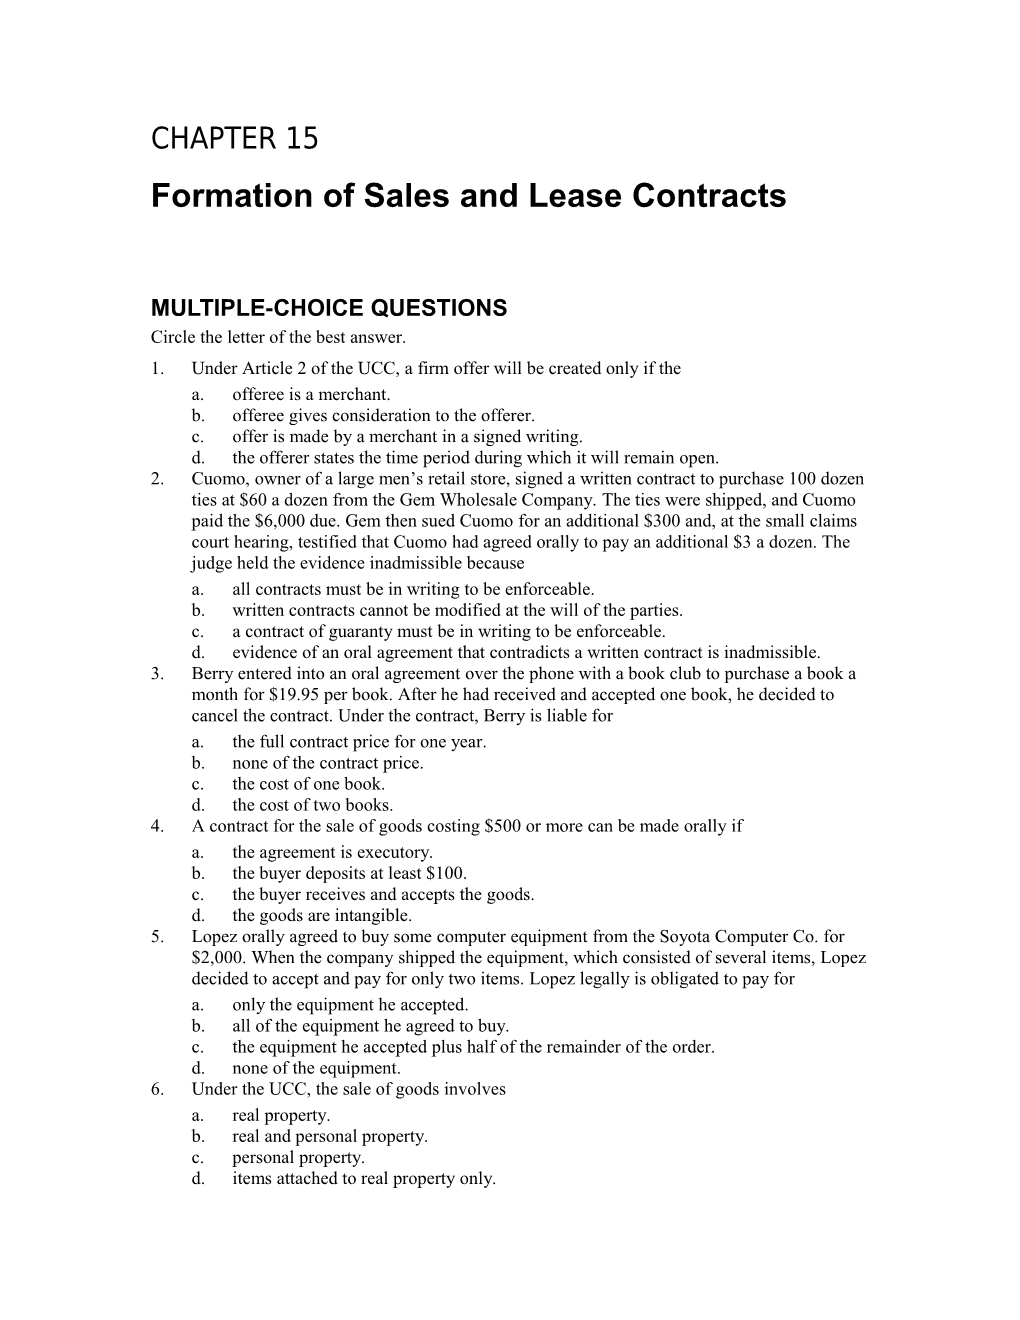 Formation of Sales and Lease Contracts